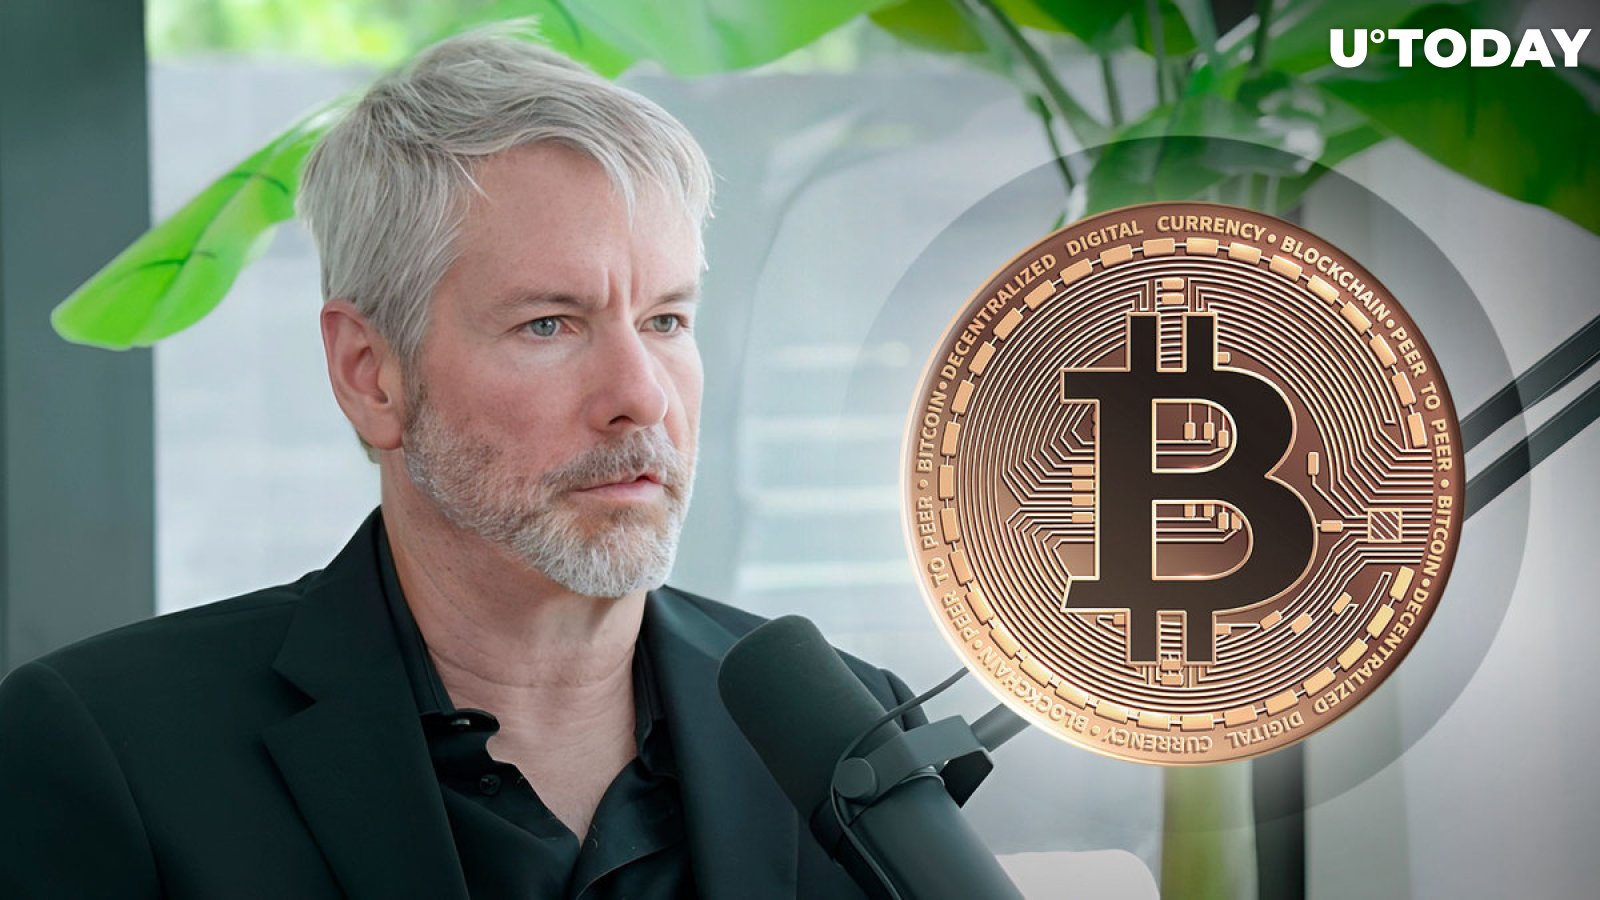 Michael Saylor Doubles Down on His Bitcoin Bet, Dismissing Gold